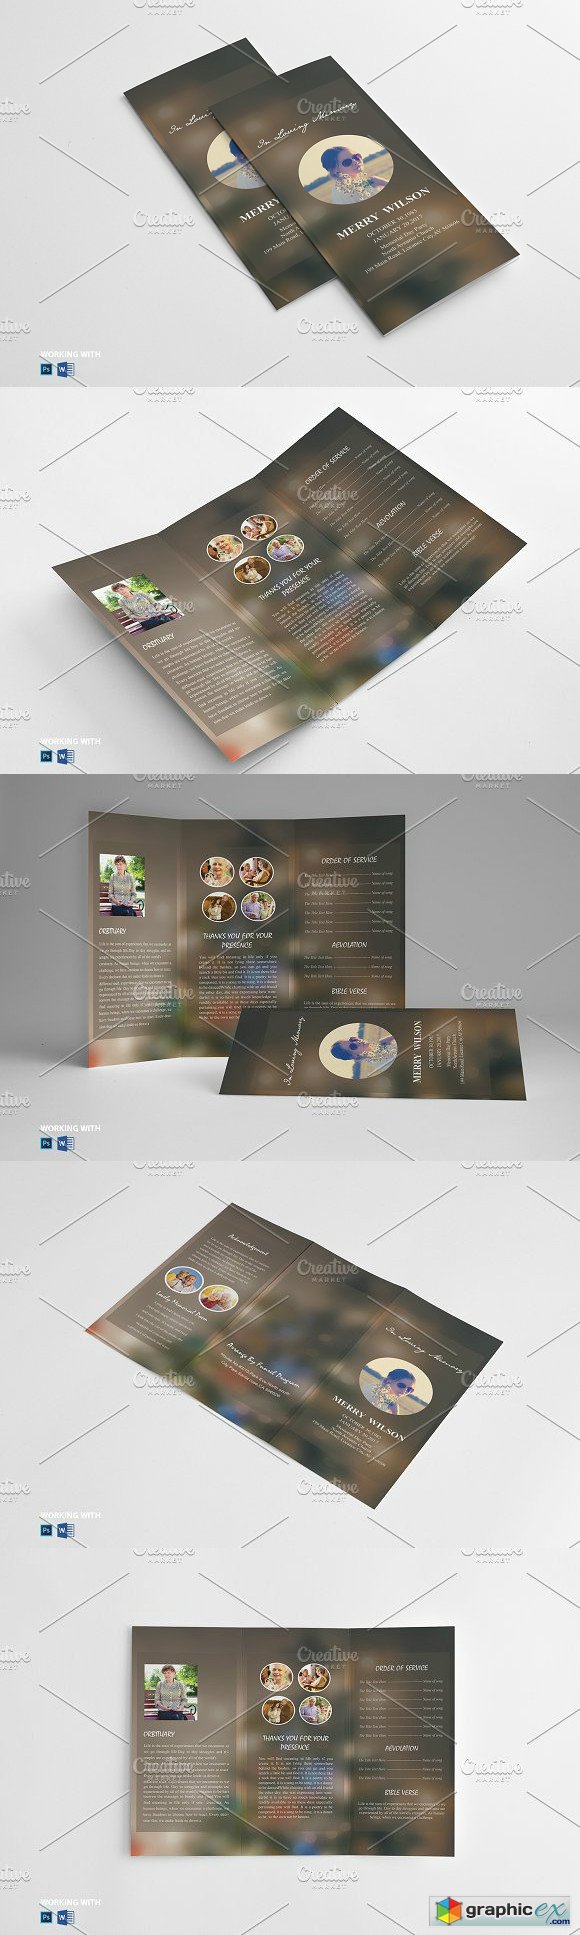 Trifold Funeral Program Template